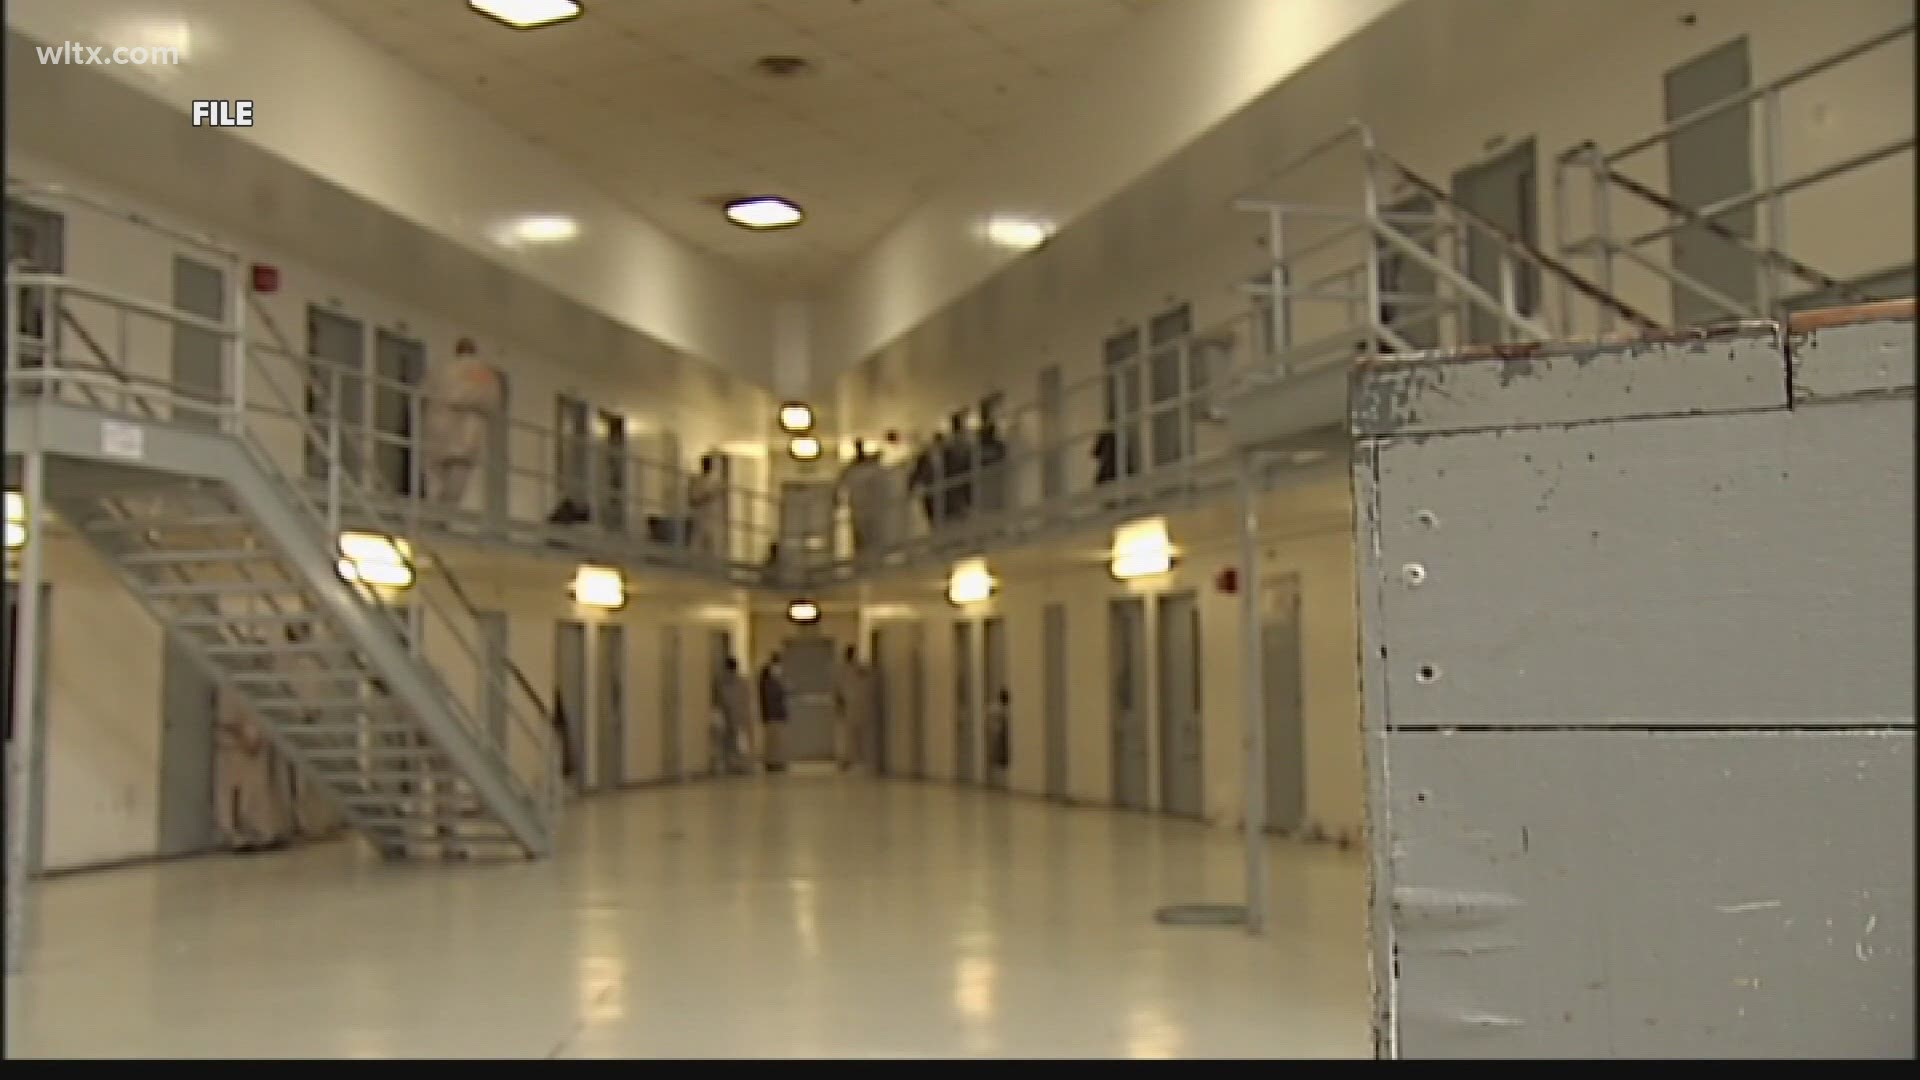 New technology aims to slow the spread of COVID-19 in the state prison system.